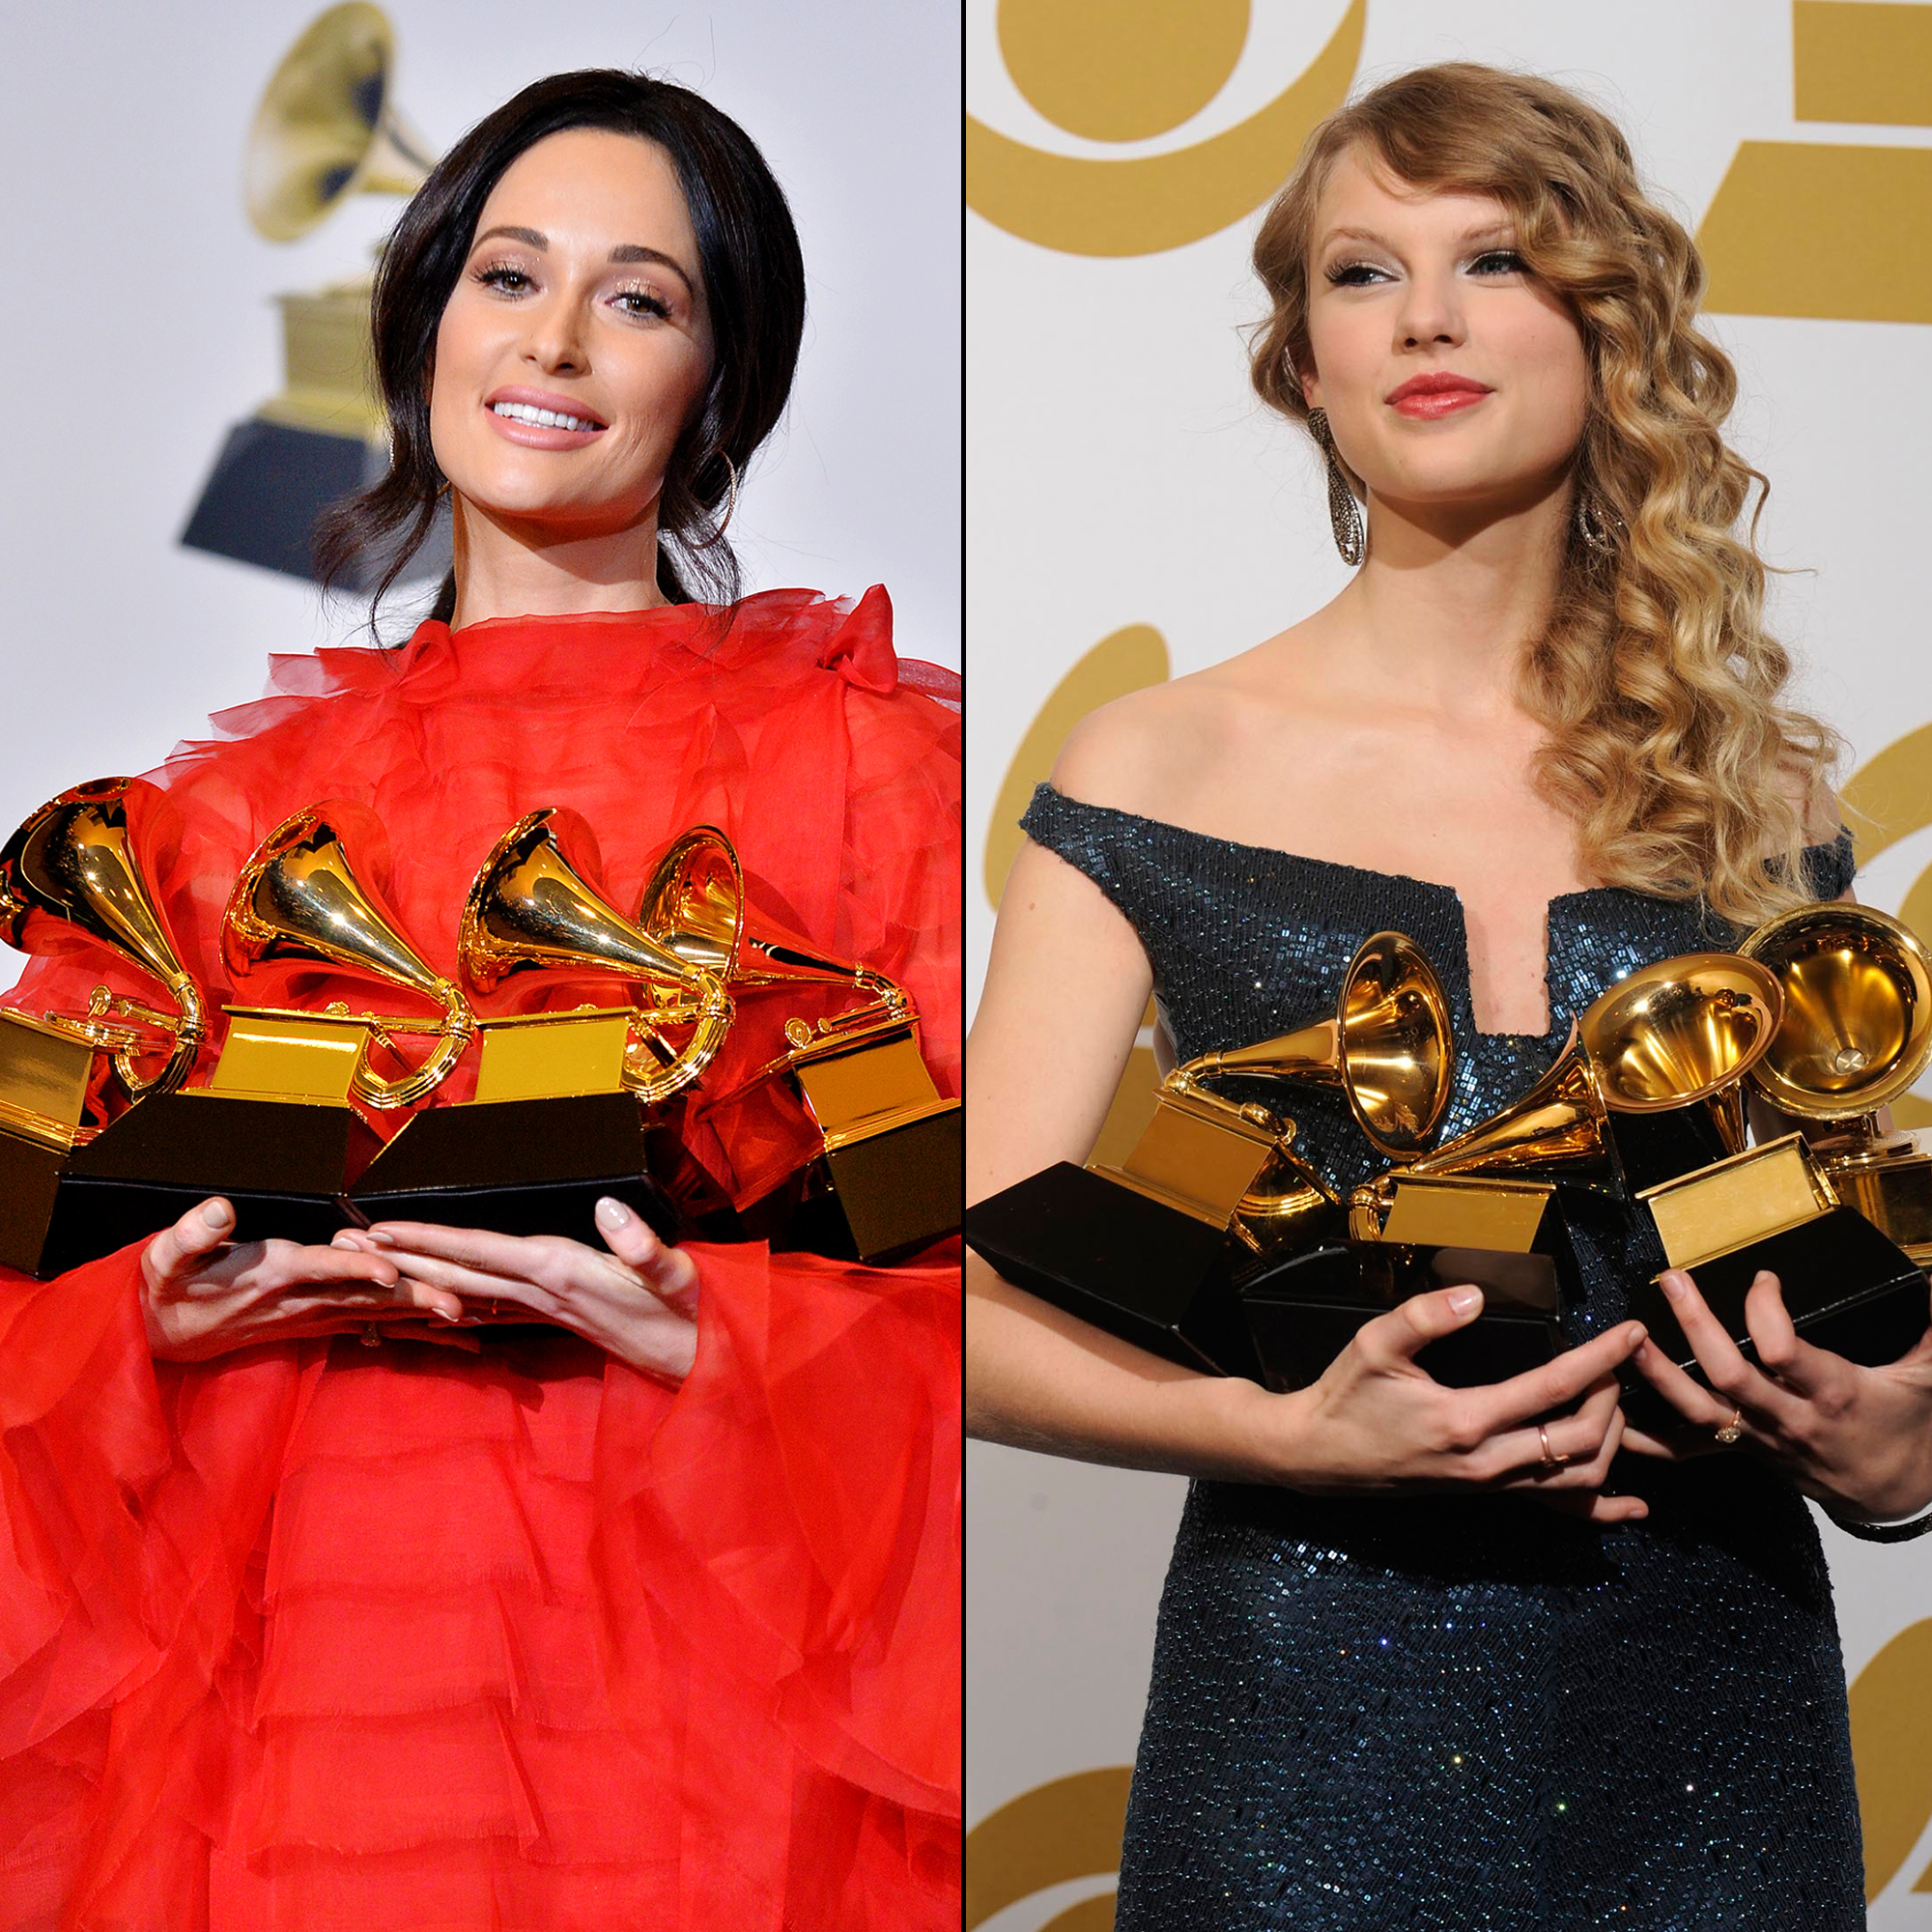 Grammys 2019 Kacey Musgraves Wins Same As Taylor Swift In 2010